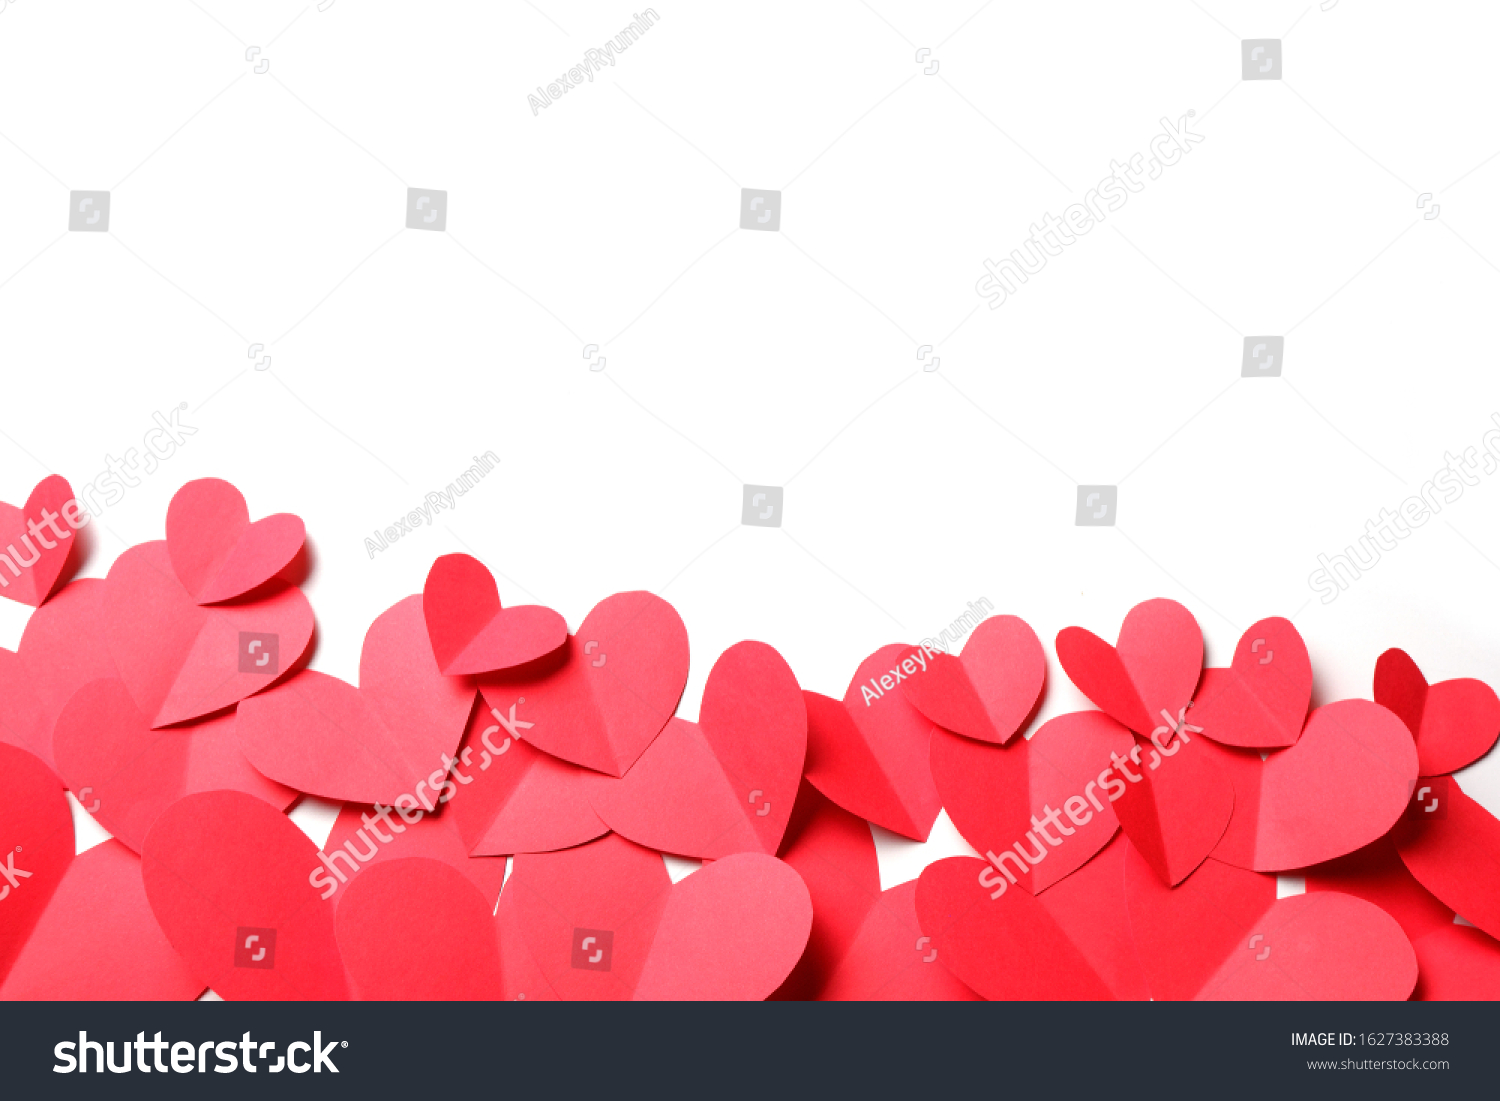 Cut out of red paper hearts on white background isolated. Cute Valentines day, Womans day, love, romantic or wedding composition with copy space for your text  for banner, congratulation, card, offer, flyer, advertising, invitation.